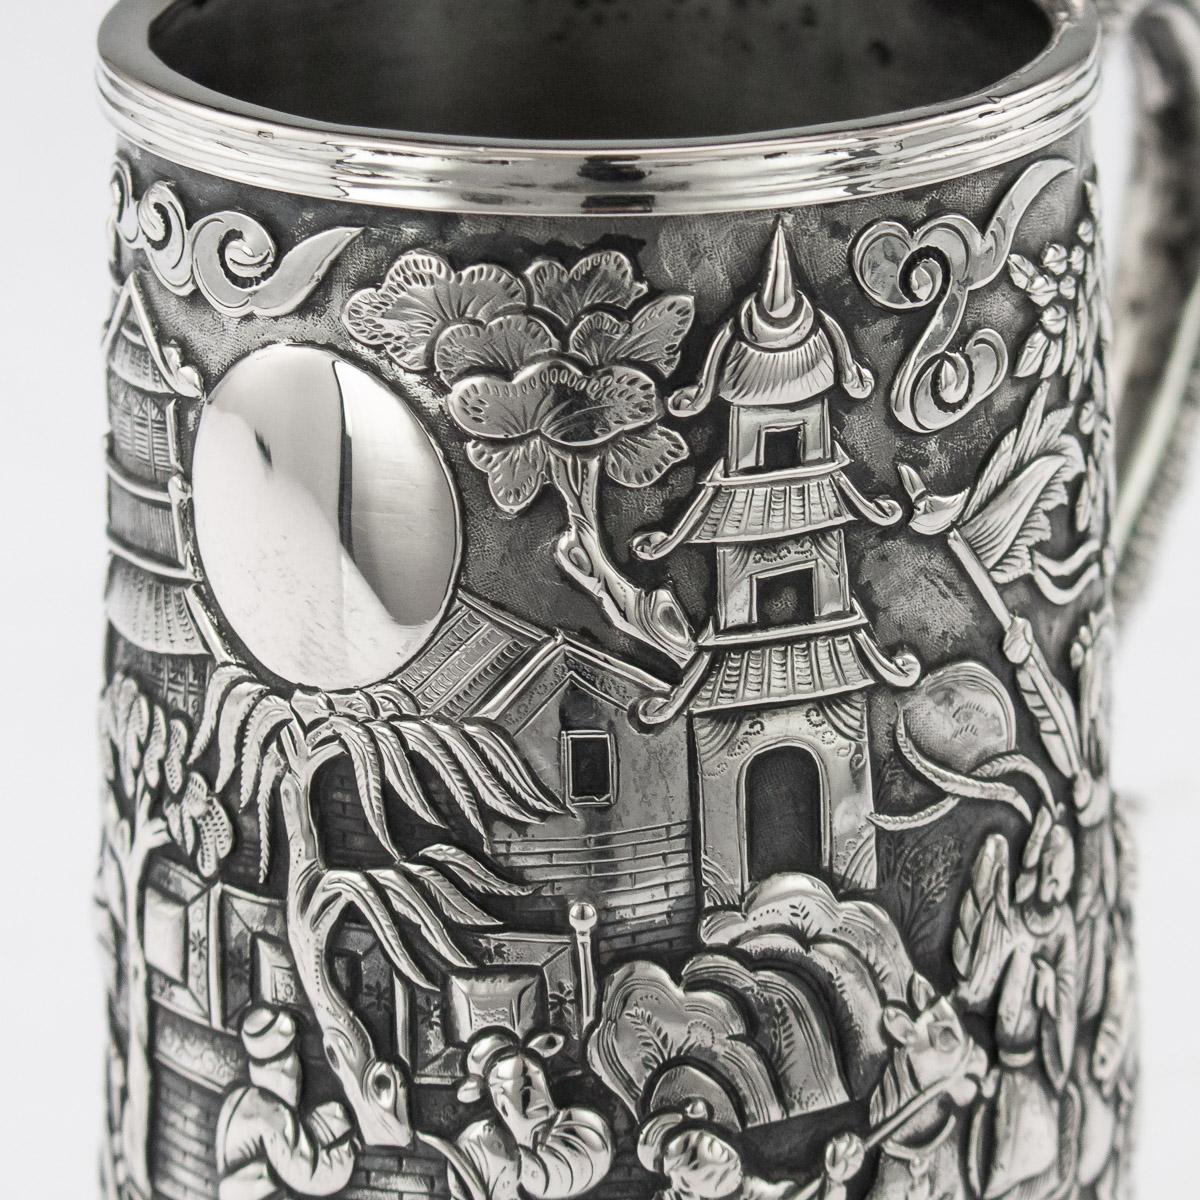 19thC Chinese Export Solid Silver Nobility Scenes Mug, Cutshing, c.1870 4